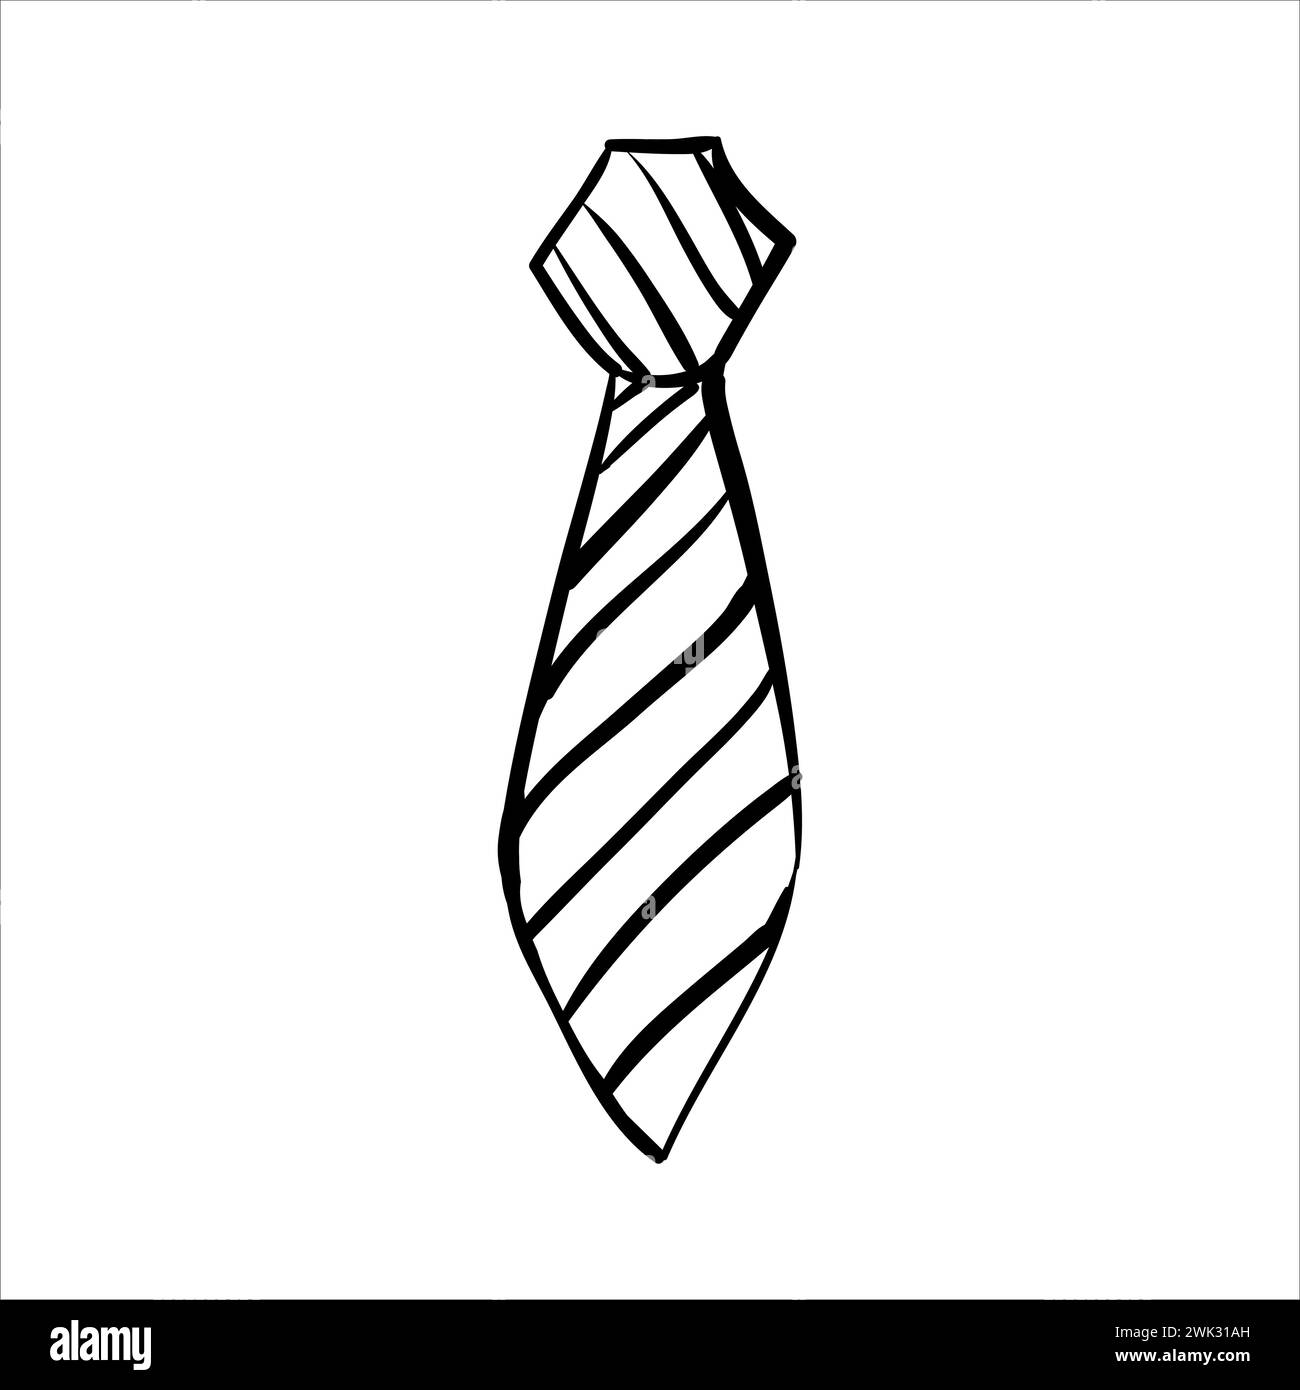 art illustration abstract hand draw vector symbol icon of set tie office Stock Vector